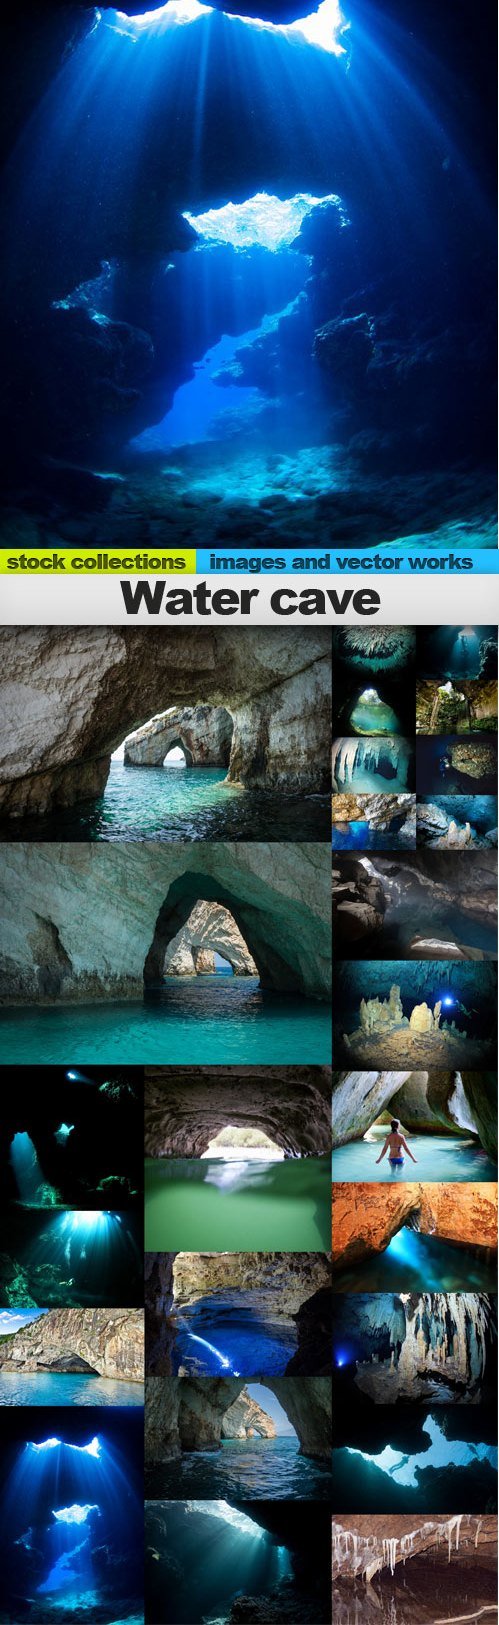 Water cave